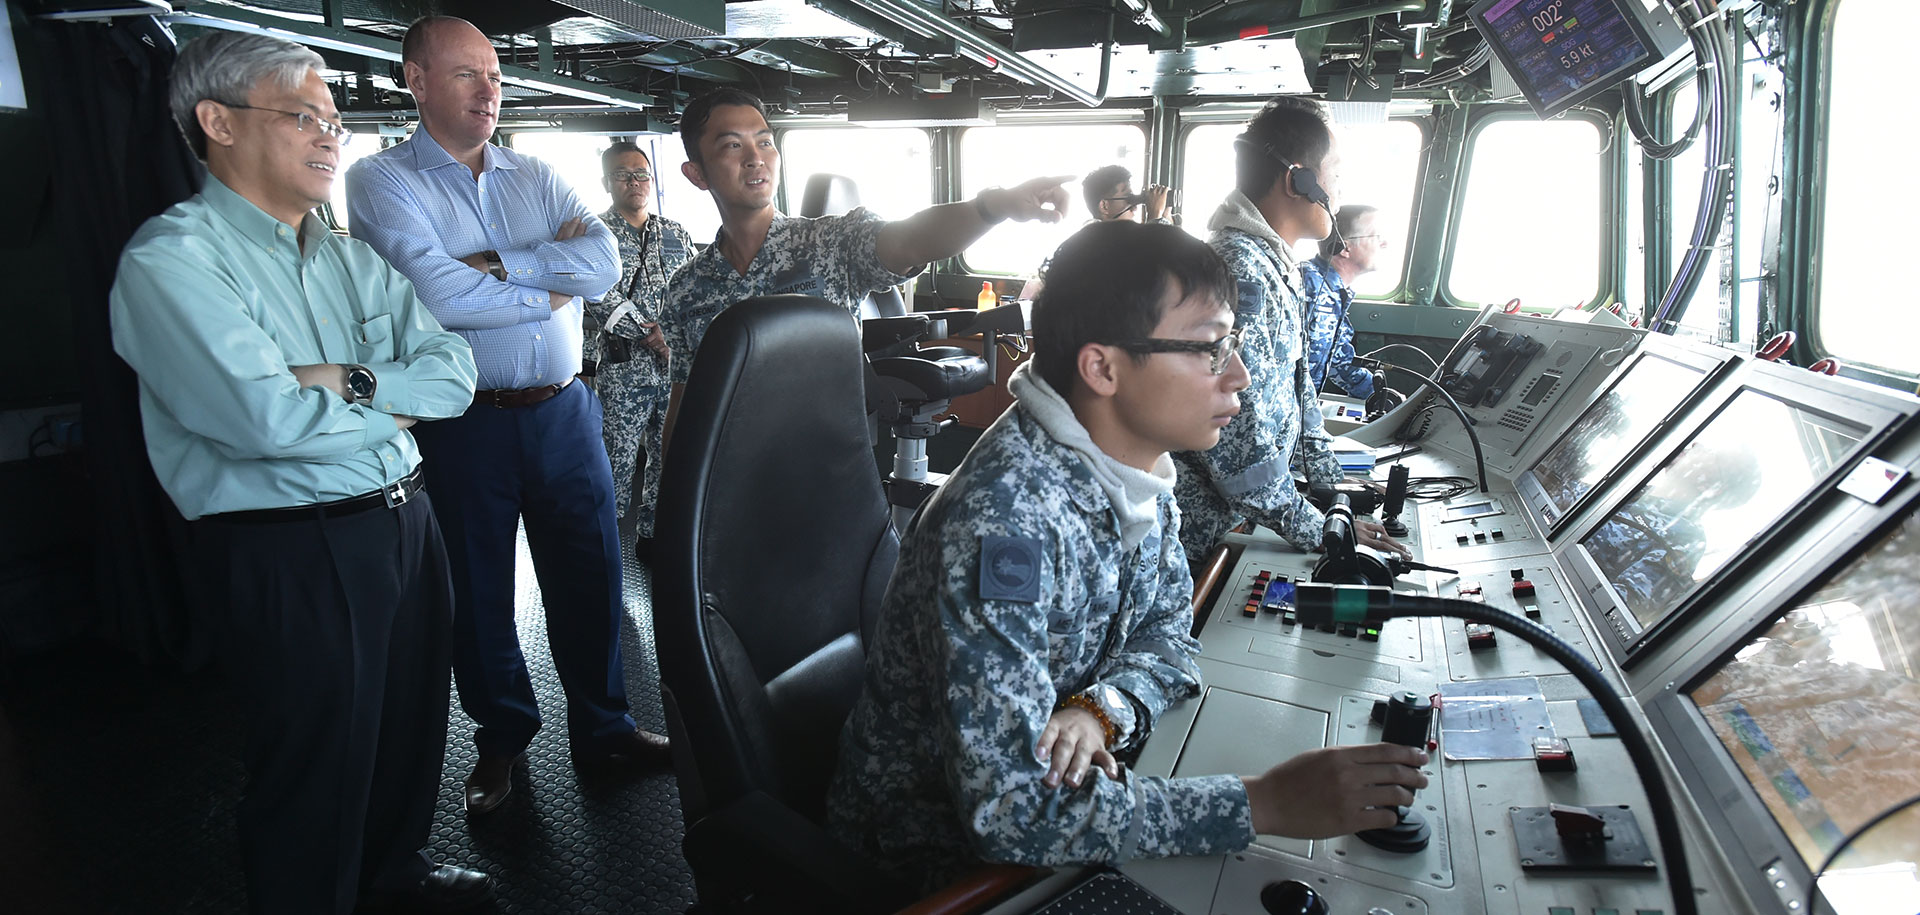 Singapore Hosts Joint FPDA 2